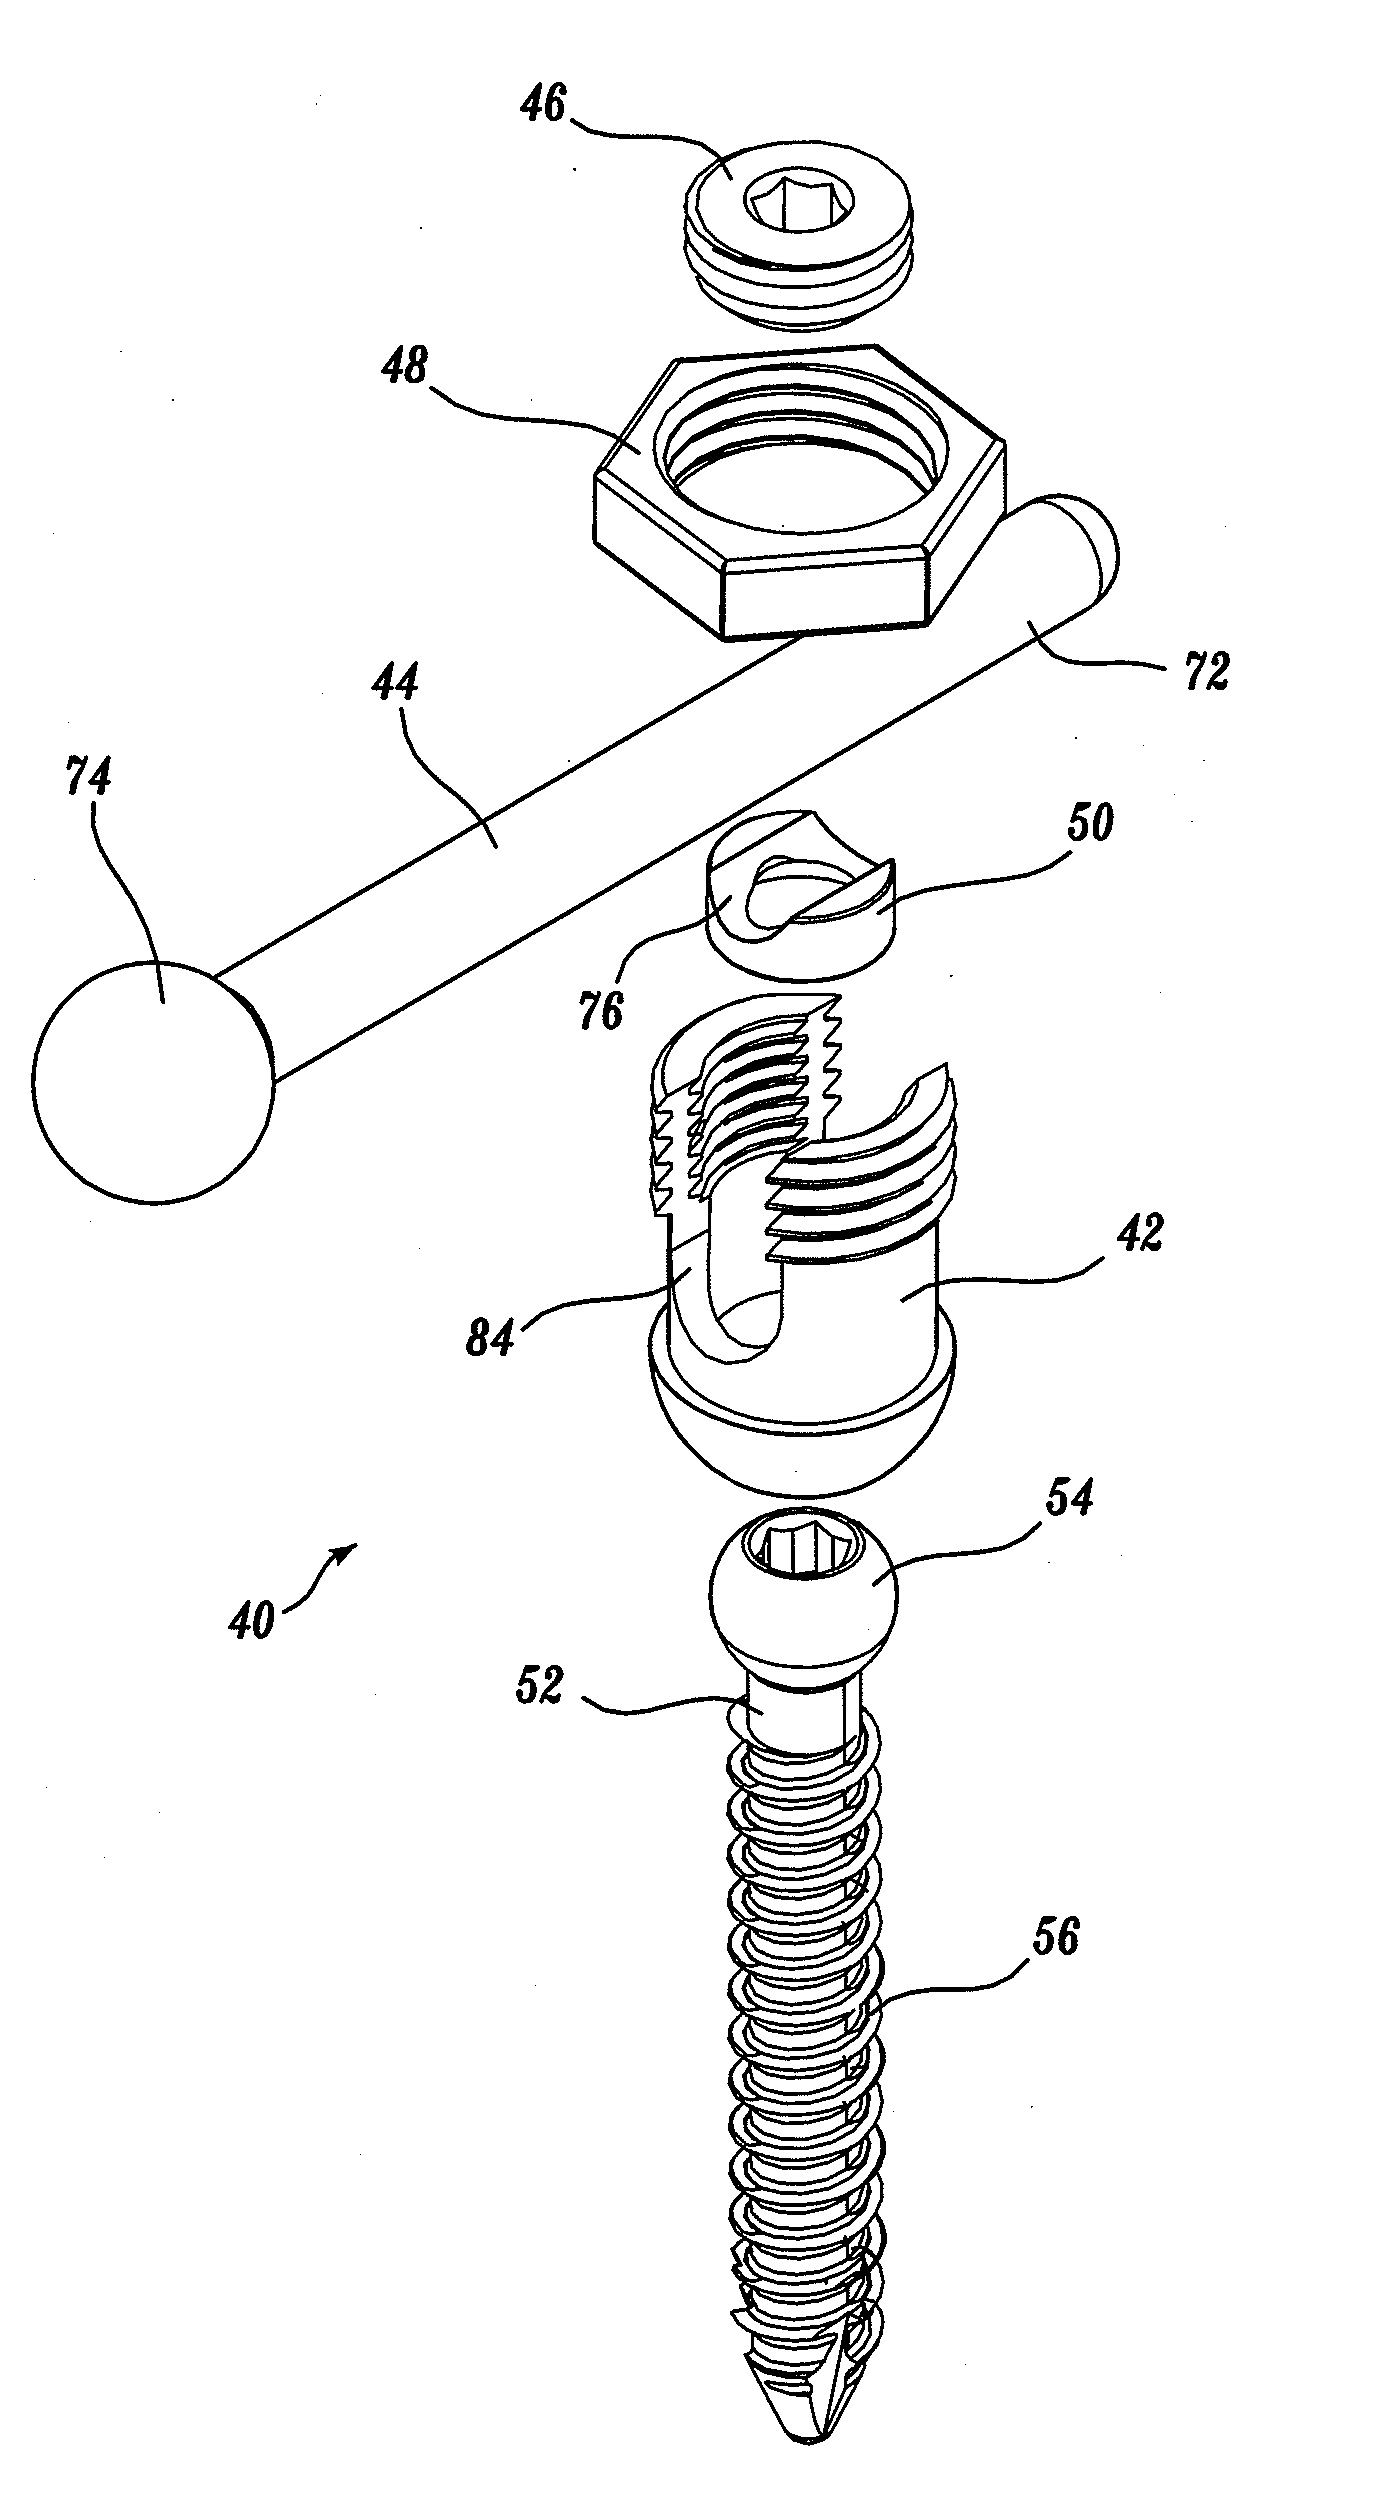 Polyaxial adjustment of facet joint prostheses